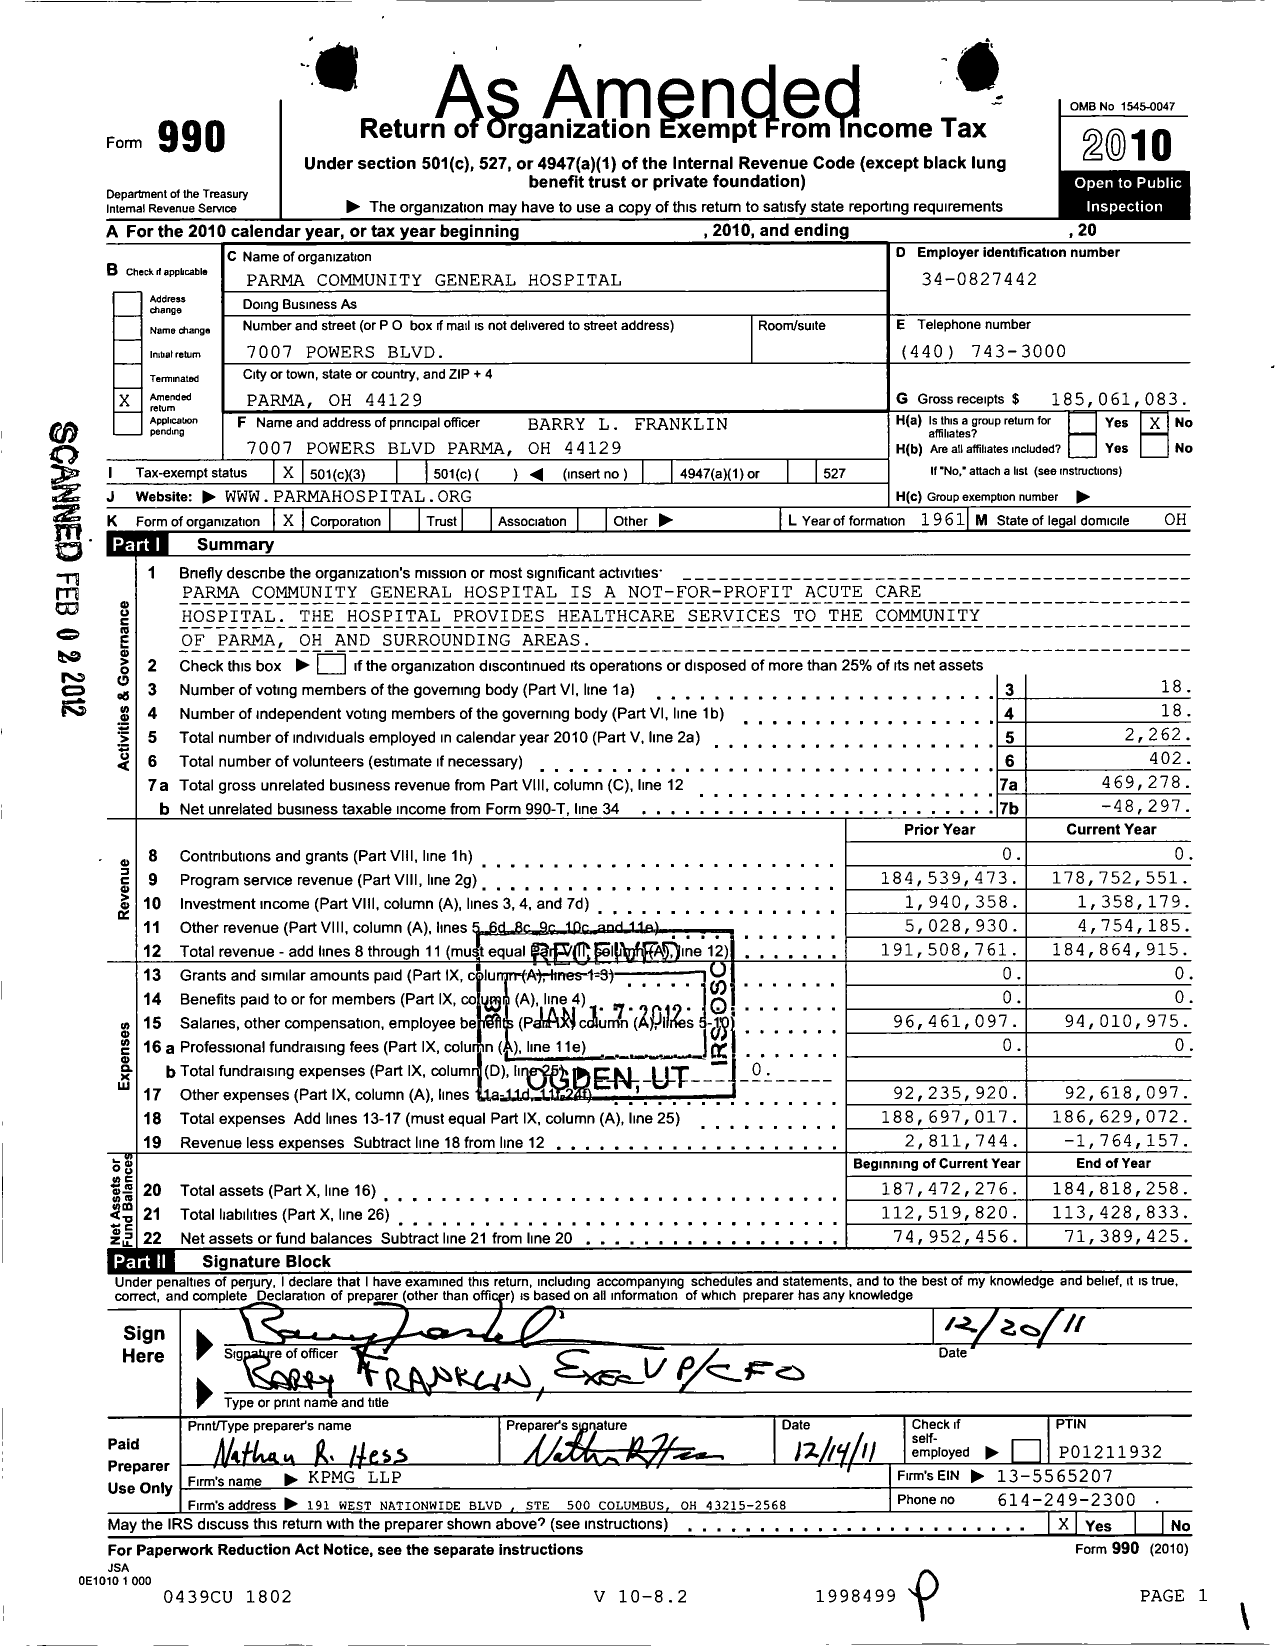 Image of first page of 2010 Form 990 for UH Parma Medical Center